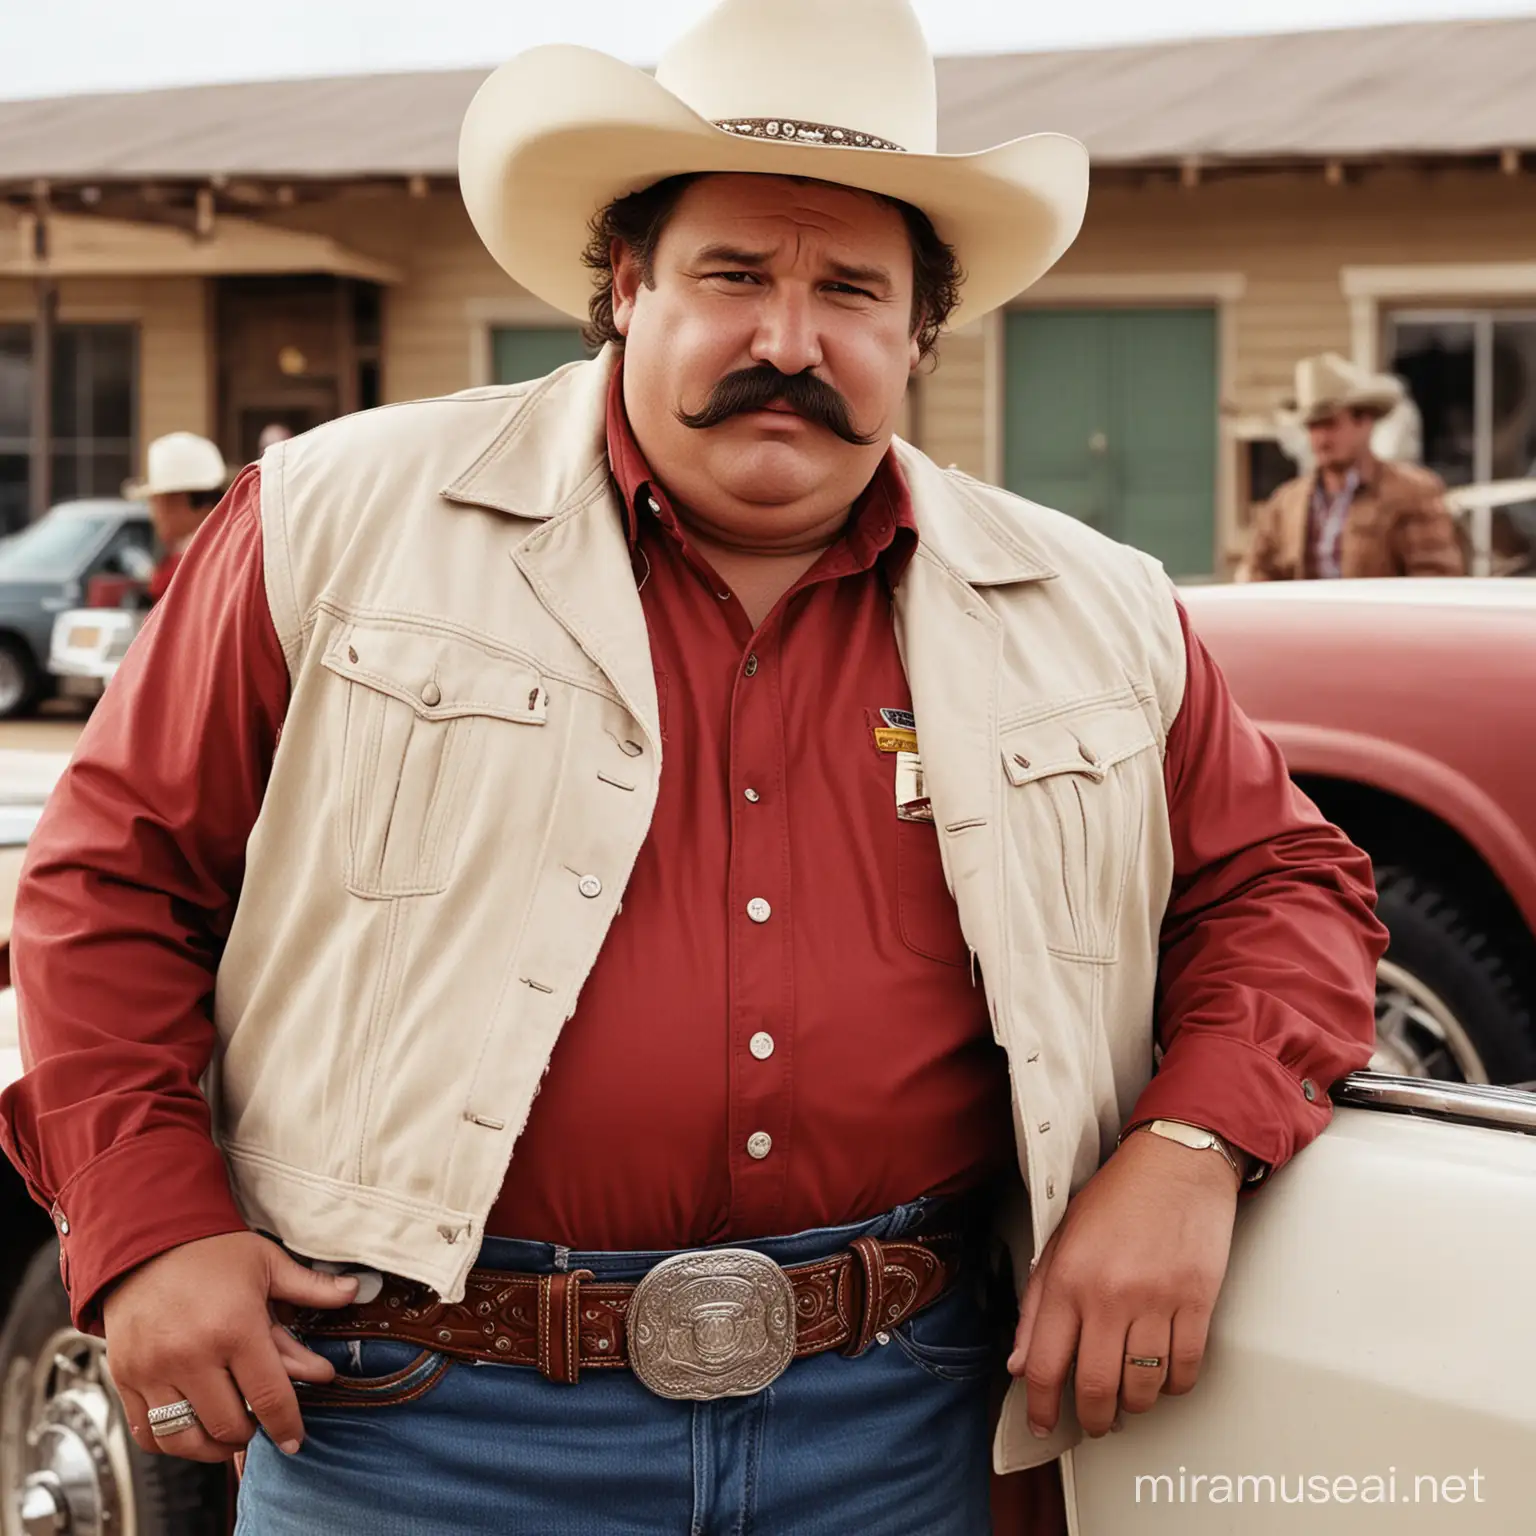 A obese man, American, mustache, dressed like a Texan oil magnate, dark hair, white cowboy hat, dark red jacket, Large belt buckle, Texas, cowboy, car dealer, talking to a Texas man with a grey mustache